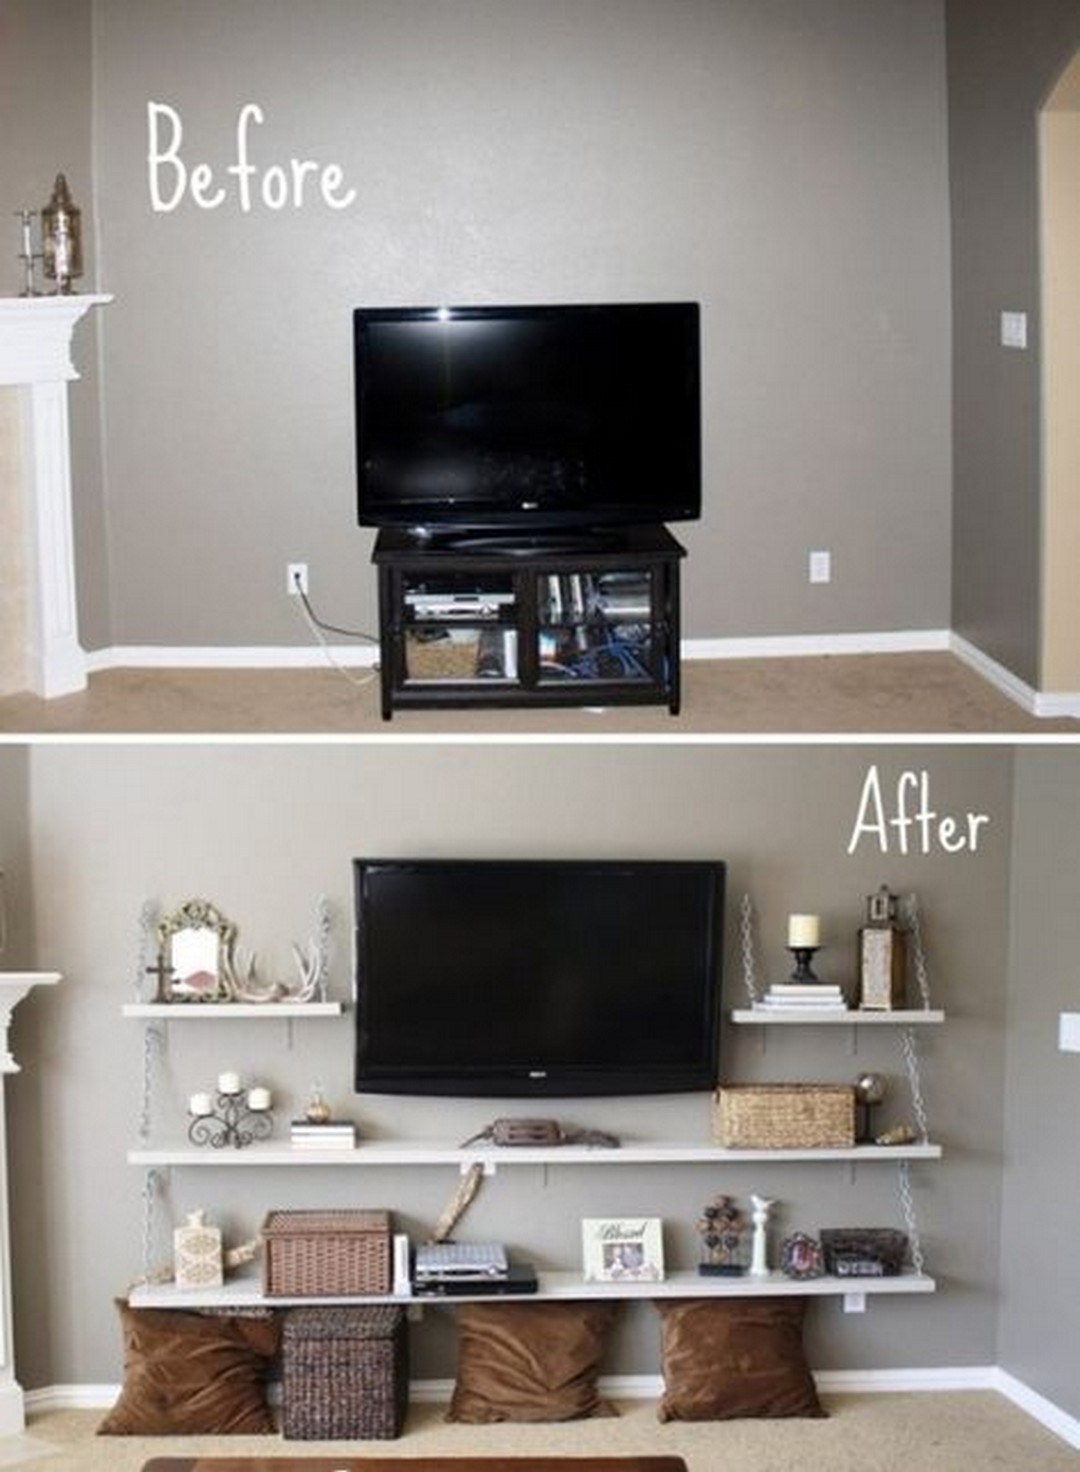 99 diy home decor ideas on a budget you must try 48.jpg